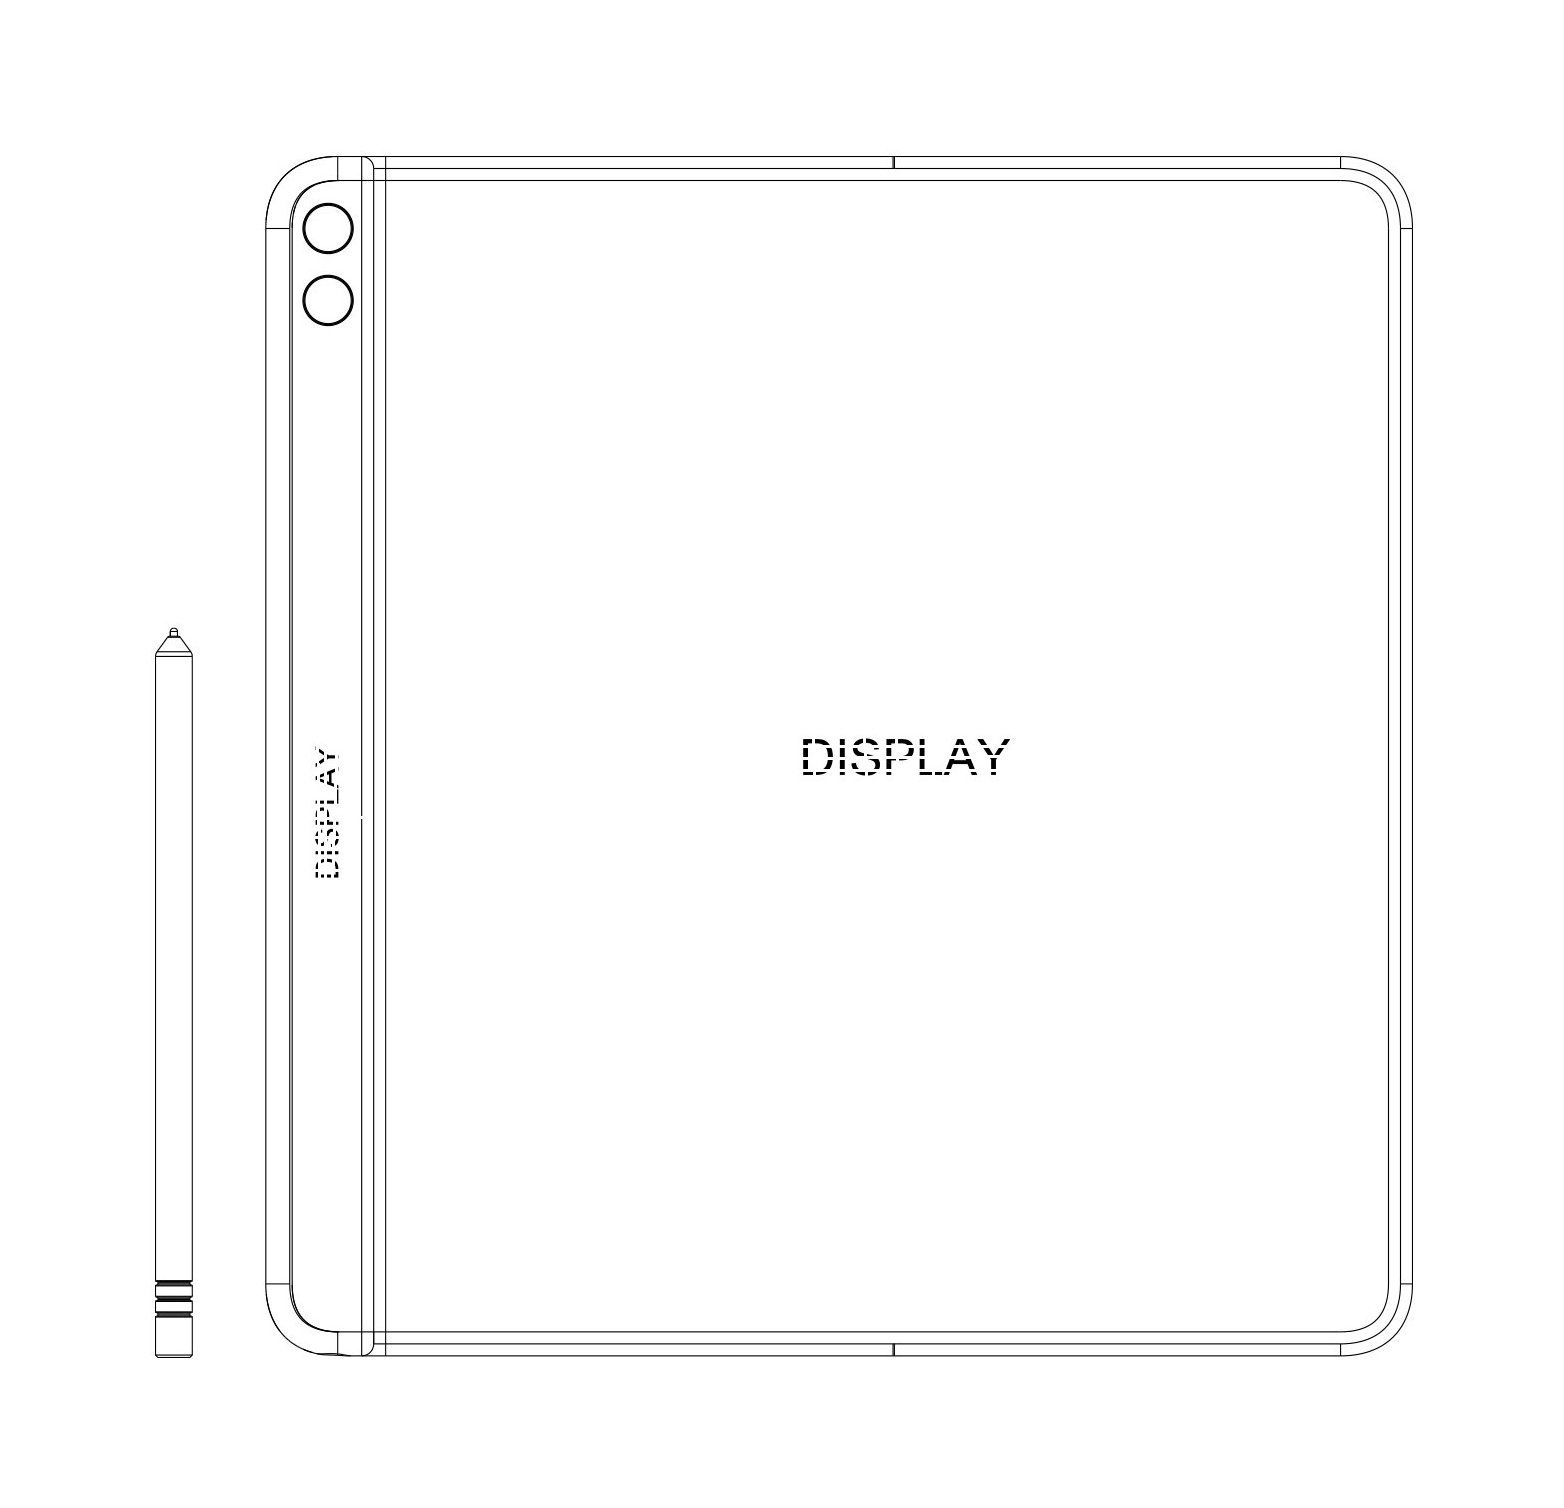 https://www.androidcentral.com/sites/androidcentral.com/files/styles/thumbnail/public/article_images/2020/01/huawei-foldable-patent-2.jpg?itok=dw5f2cMl